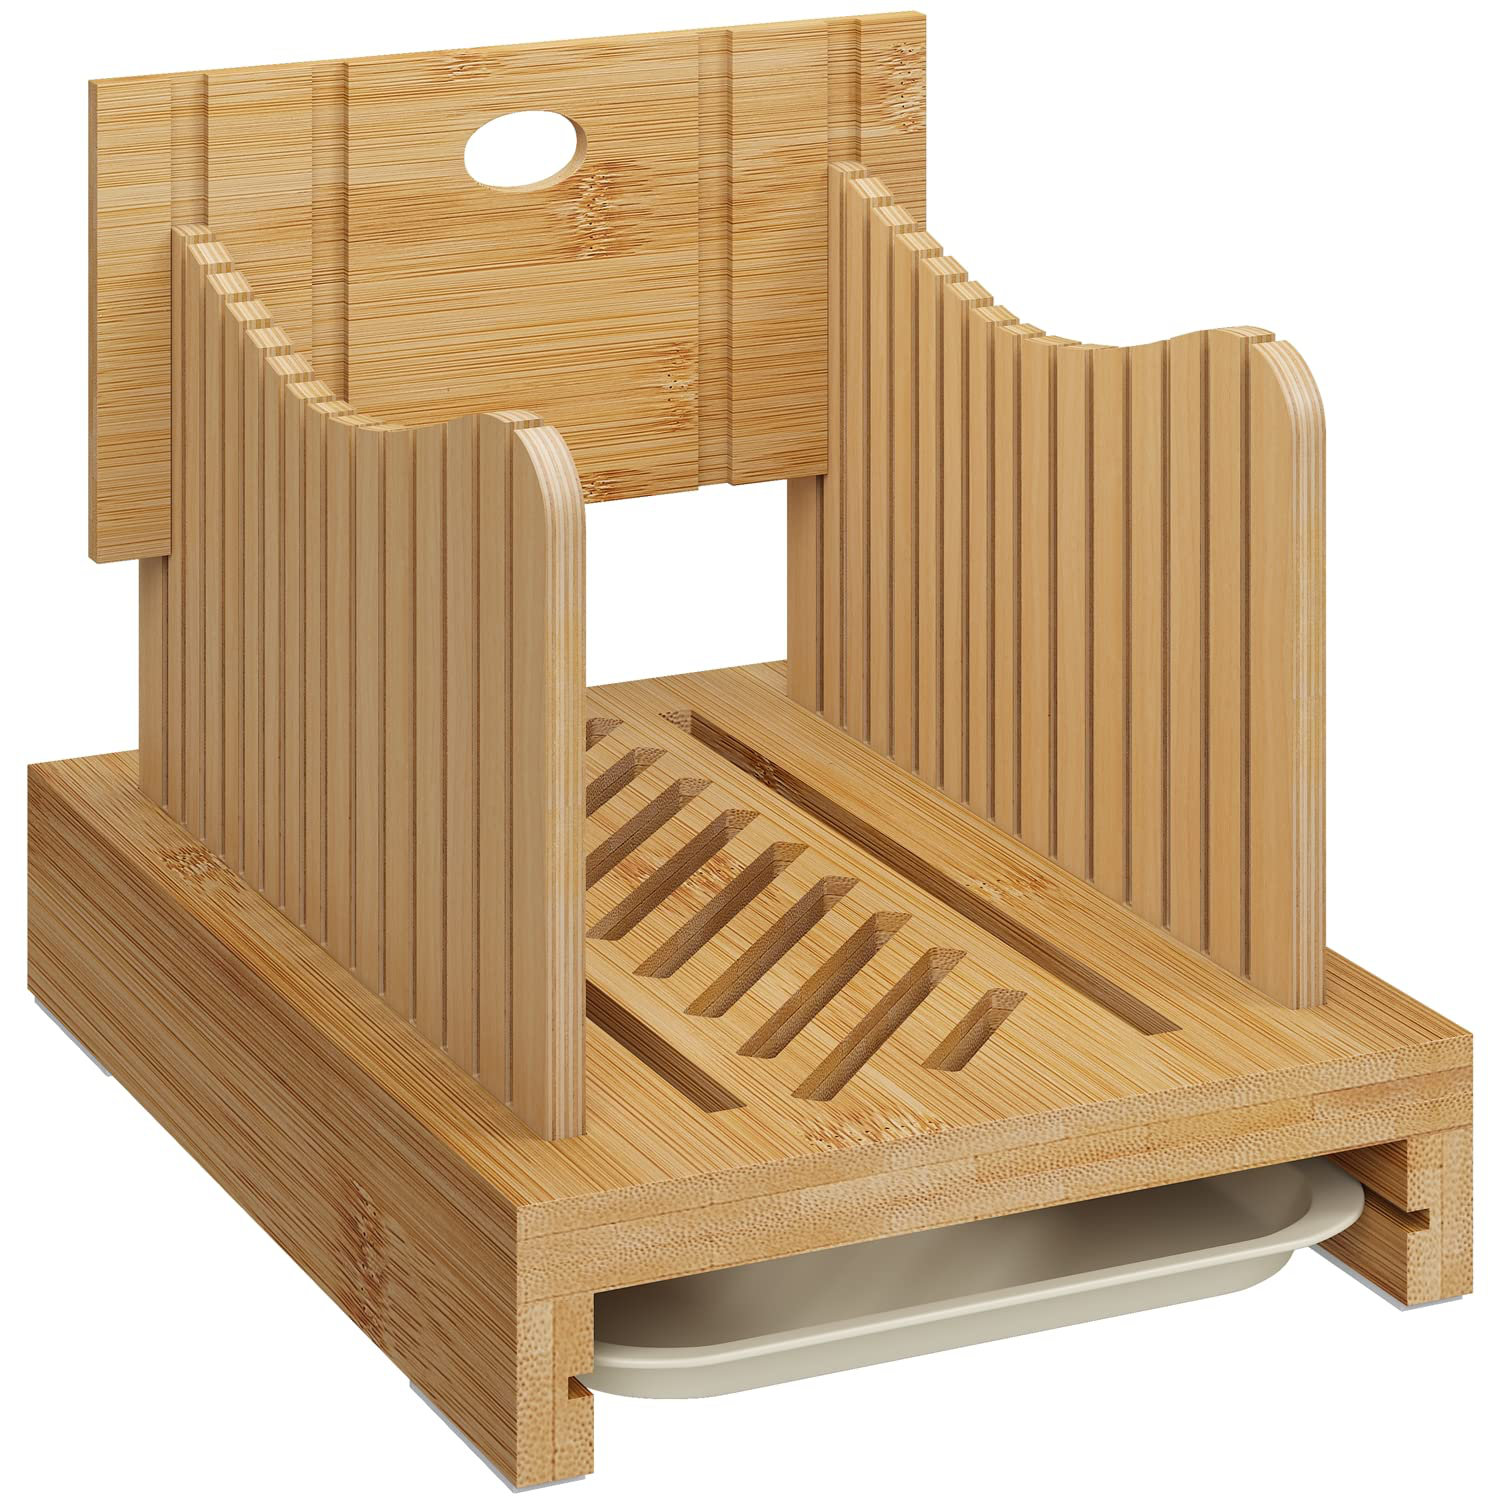 A Home Bamboo Bread Slicer For Homemade Bread,Adjustable Width